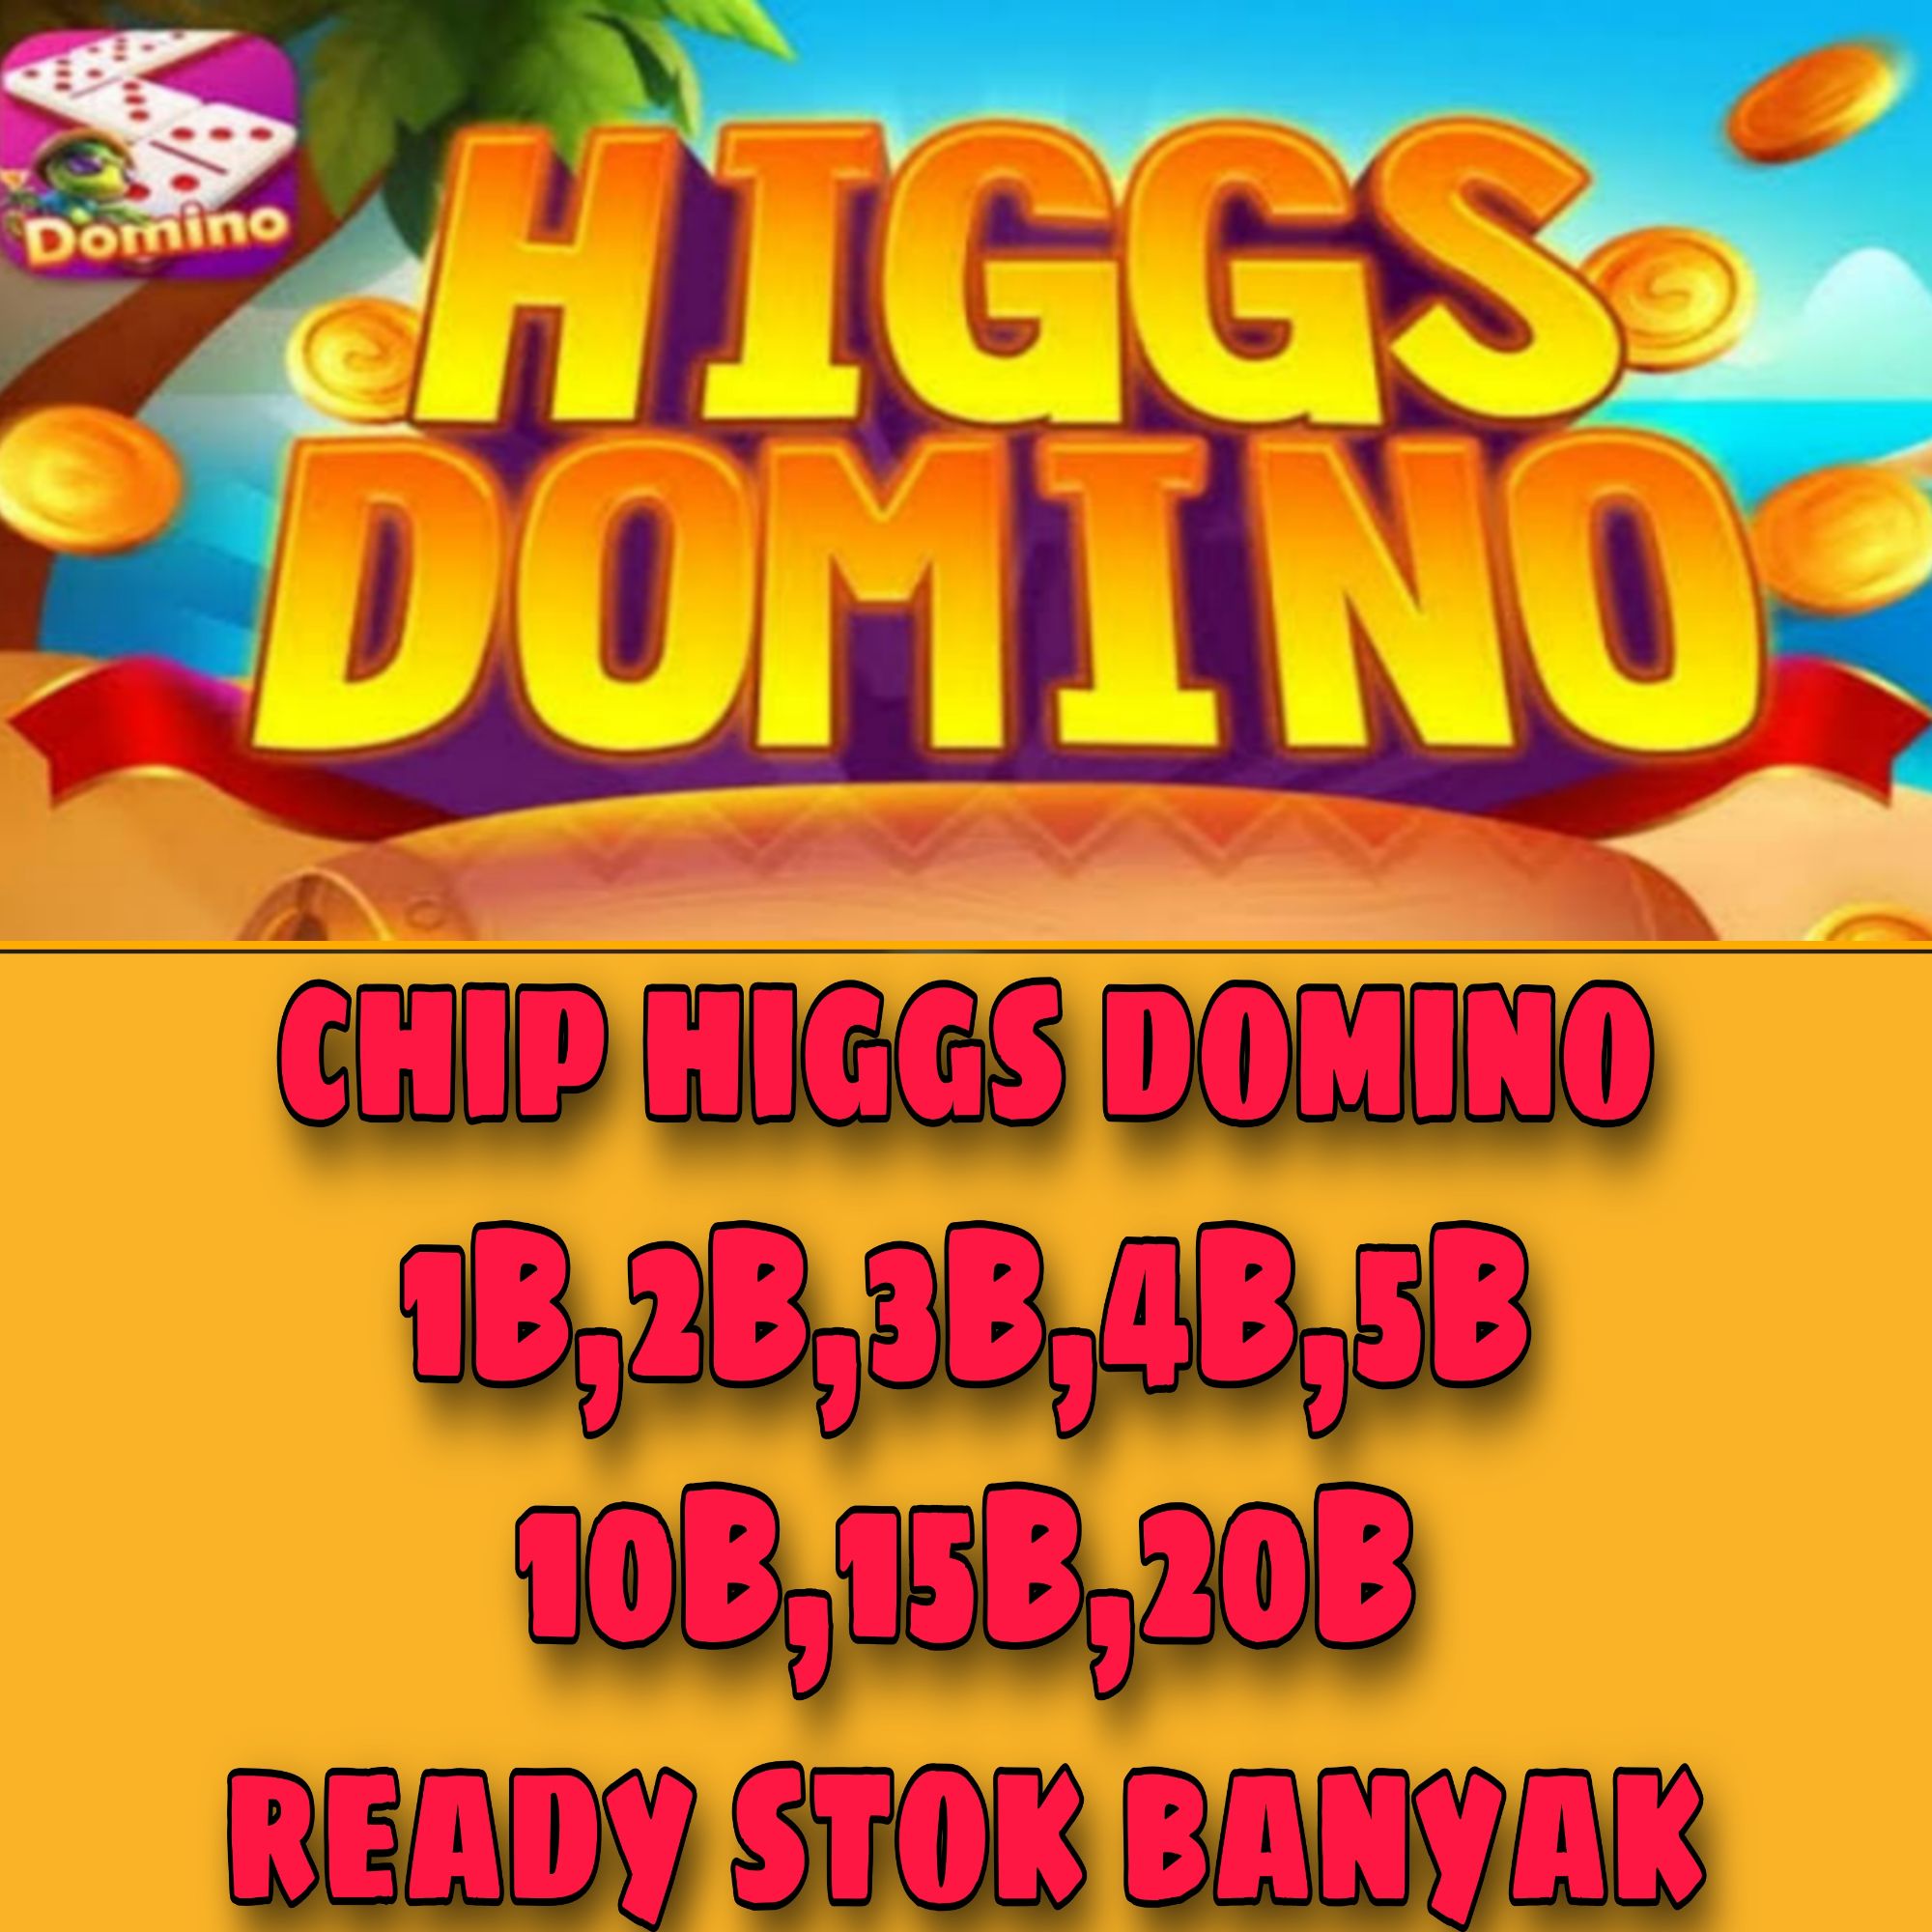 Higgs Domino For Blackberry Blackberry Connectivity Apk 1 21 0 868 Baixa Per Android Com Blackberry Enterprise Bscp Higgs Domino Domino Island Is A Game Collection Including Domino Gaple And Domino